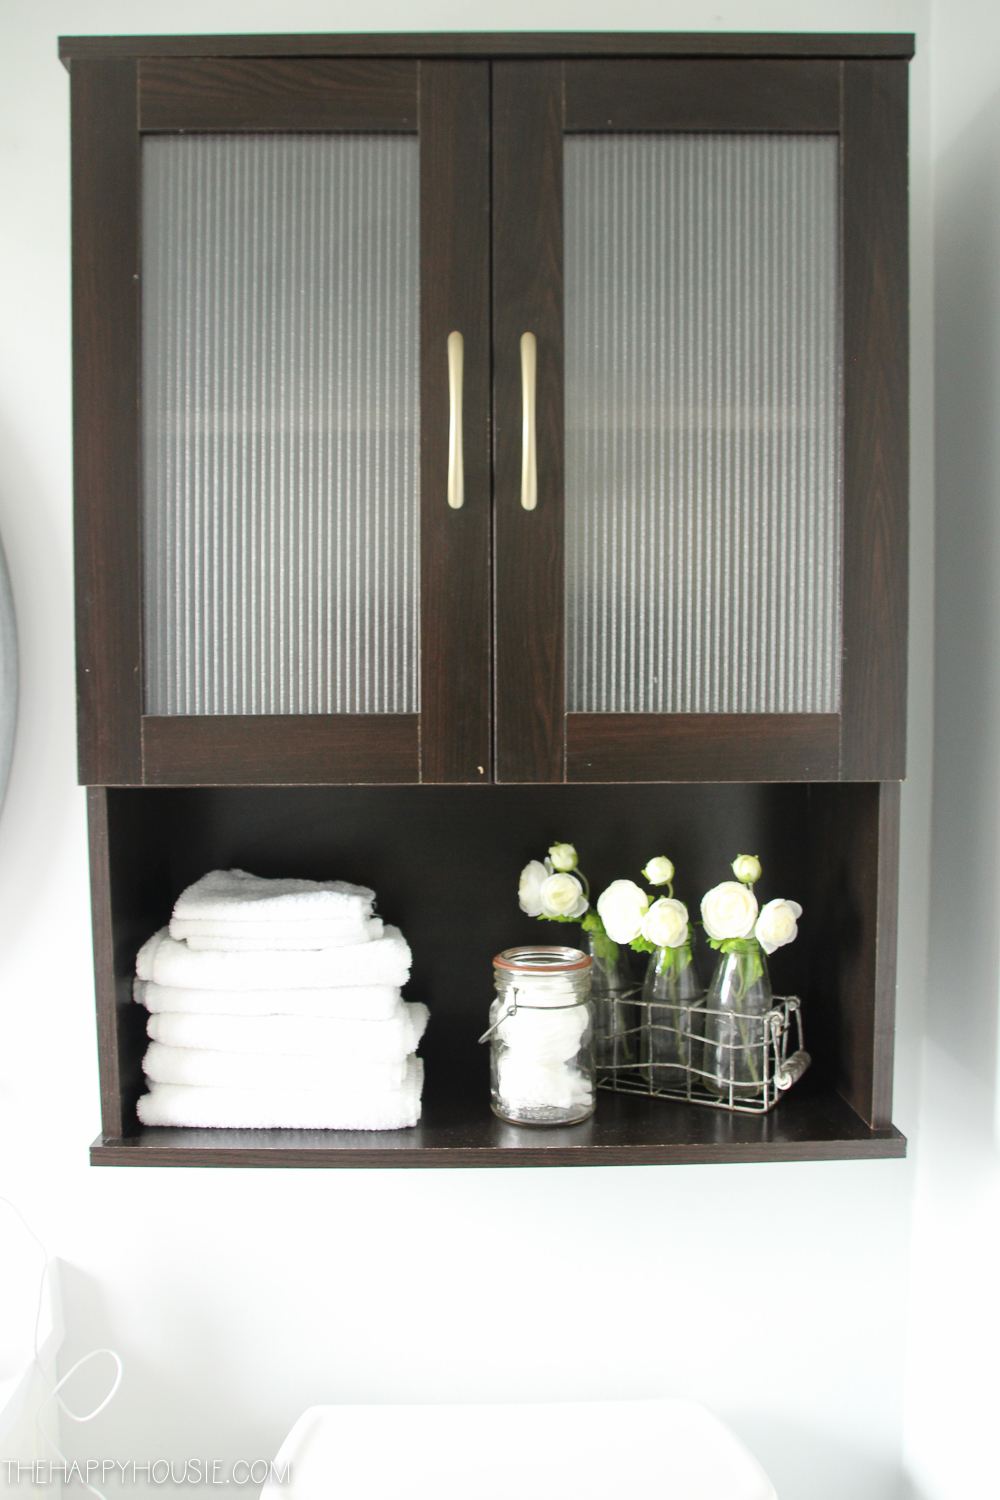 A brown cabinet with white towels and white flowers.